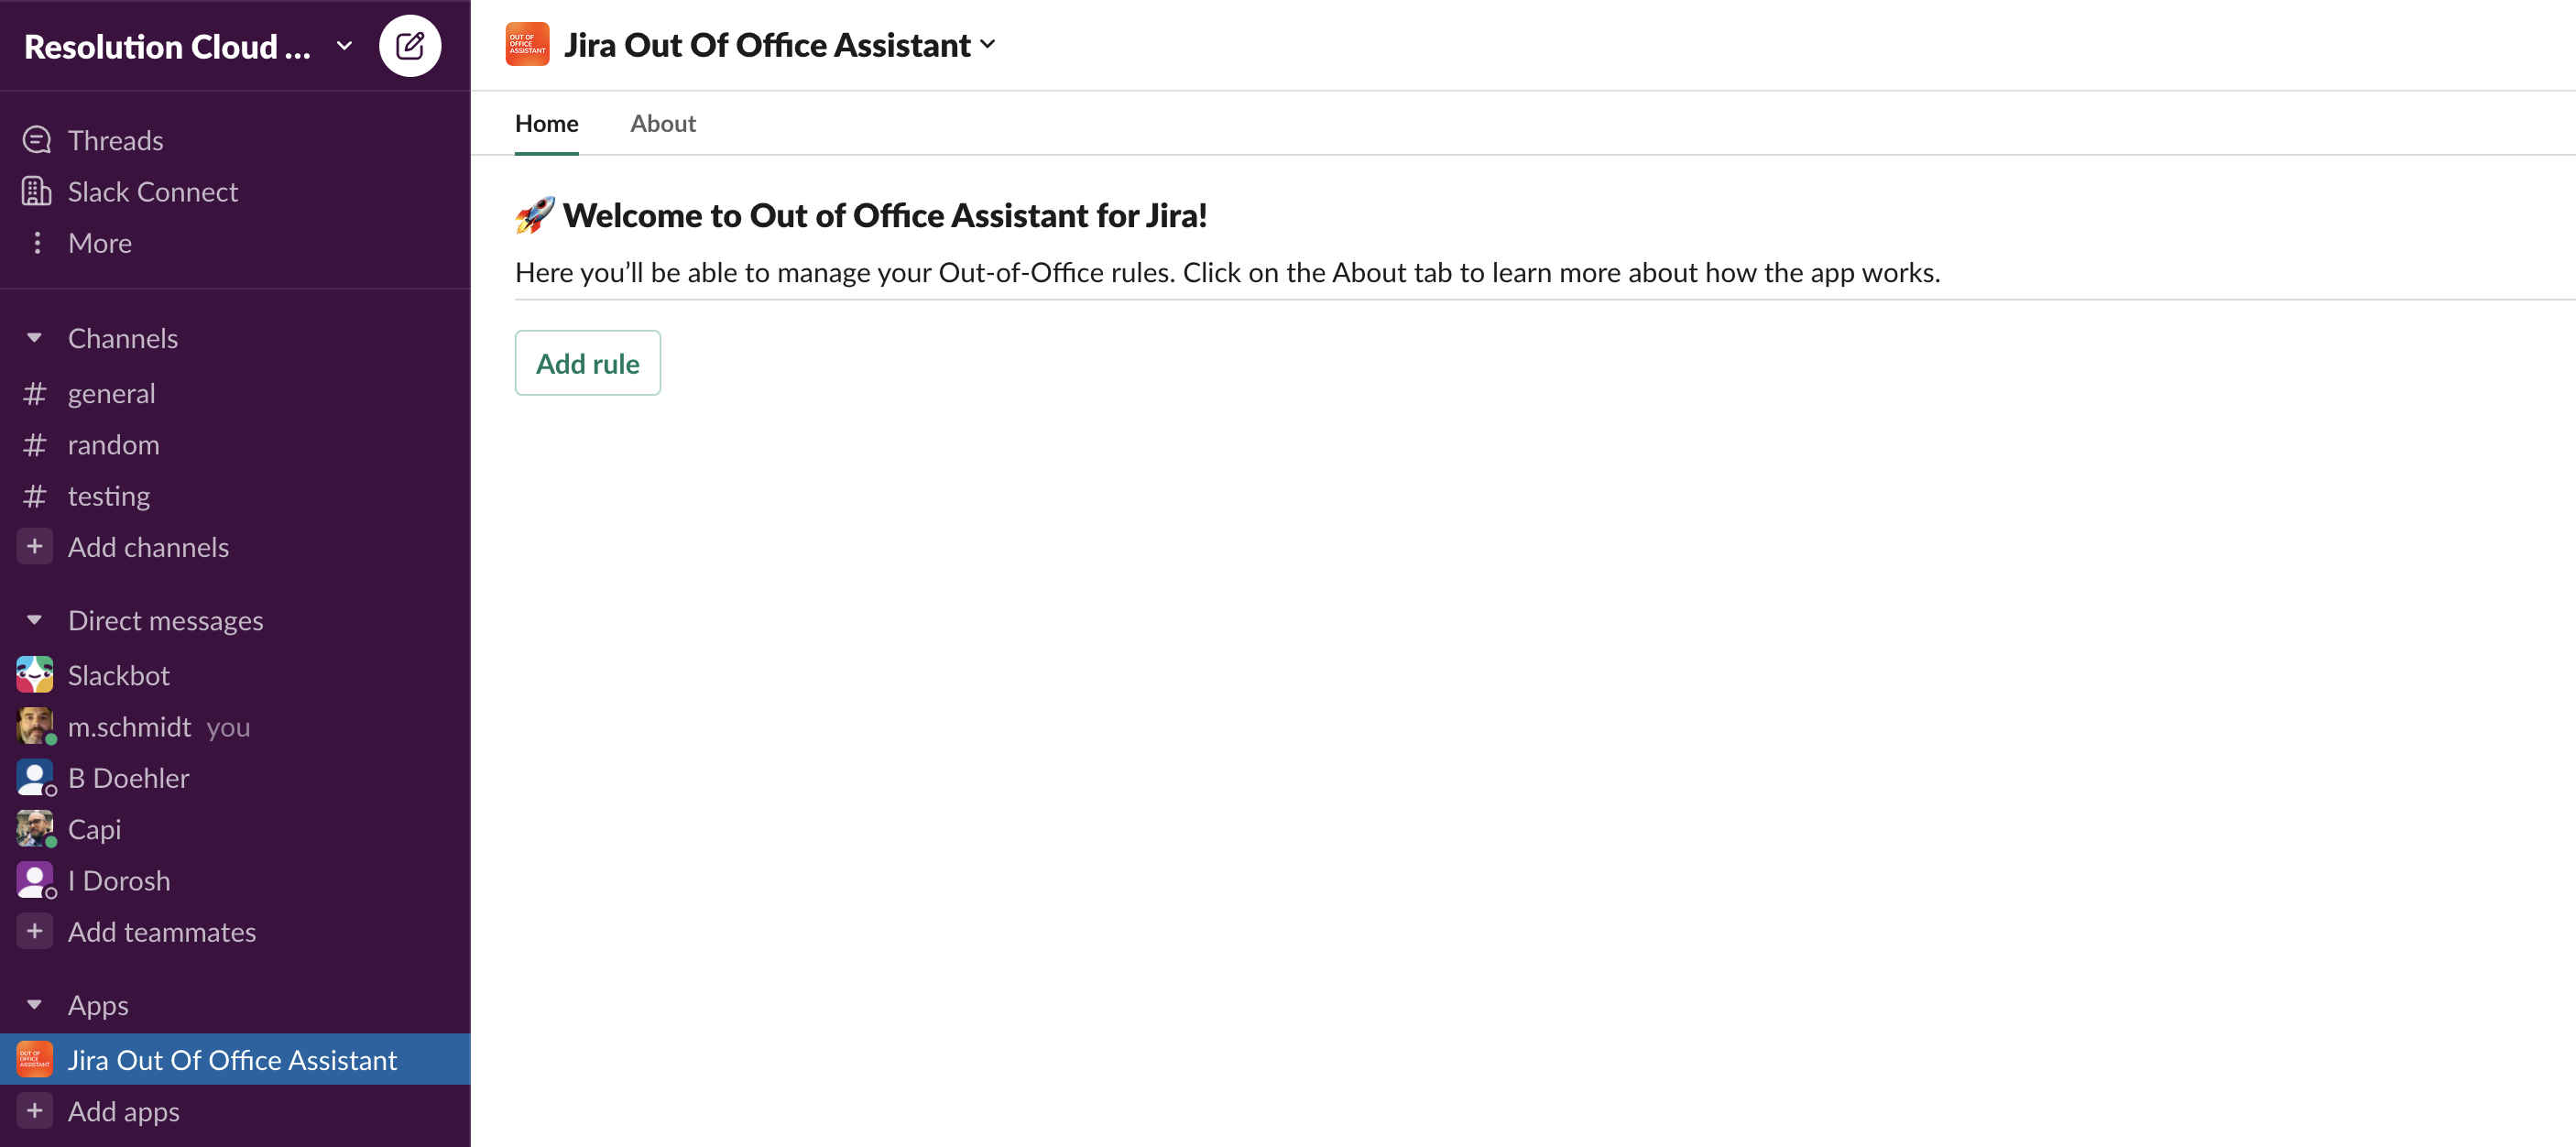 Home Tab of the Out of Office Assistant for Jira app for Slack